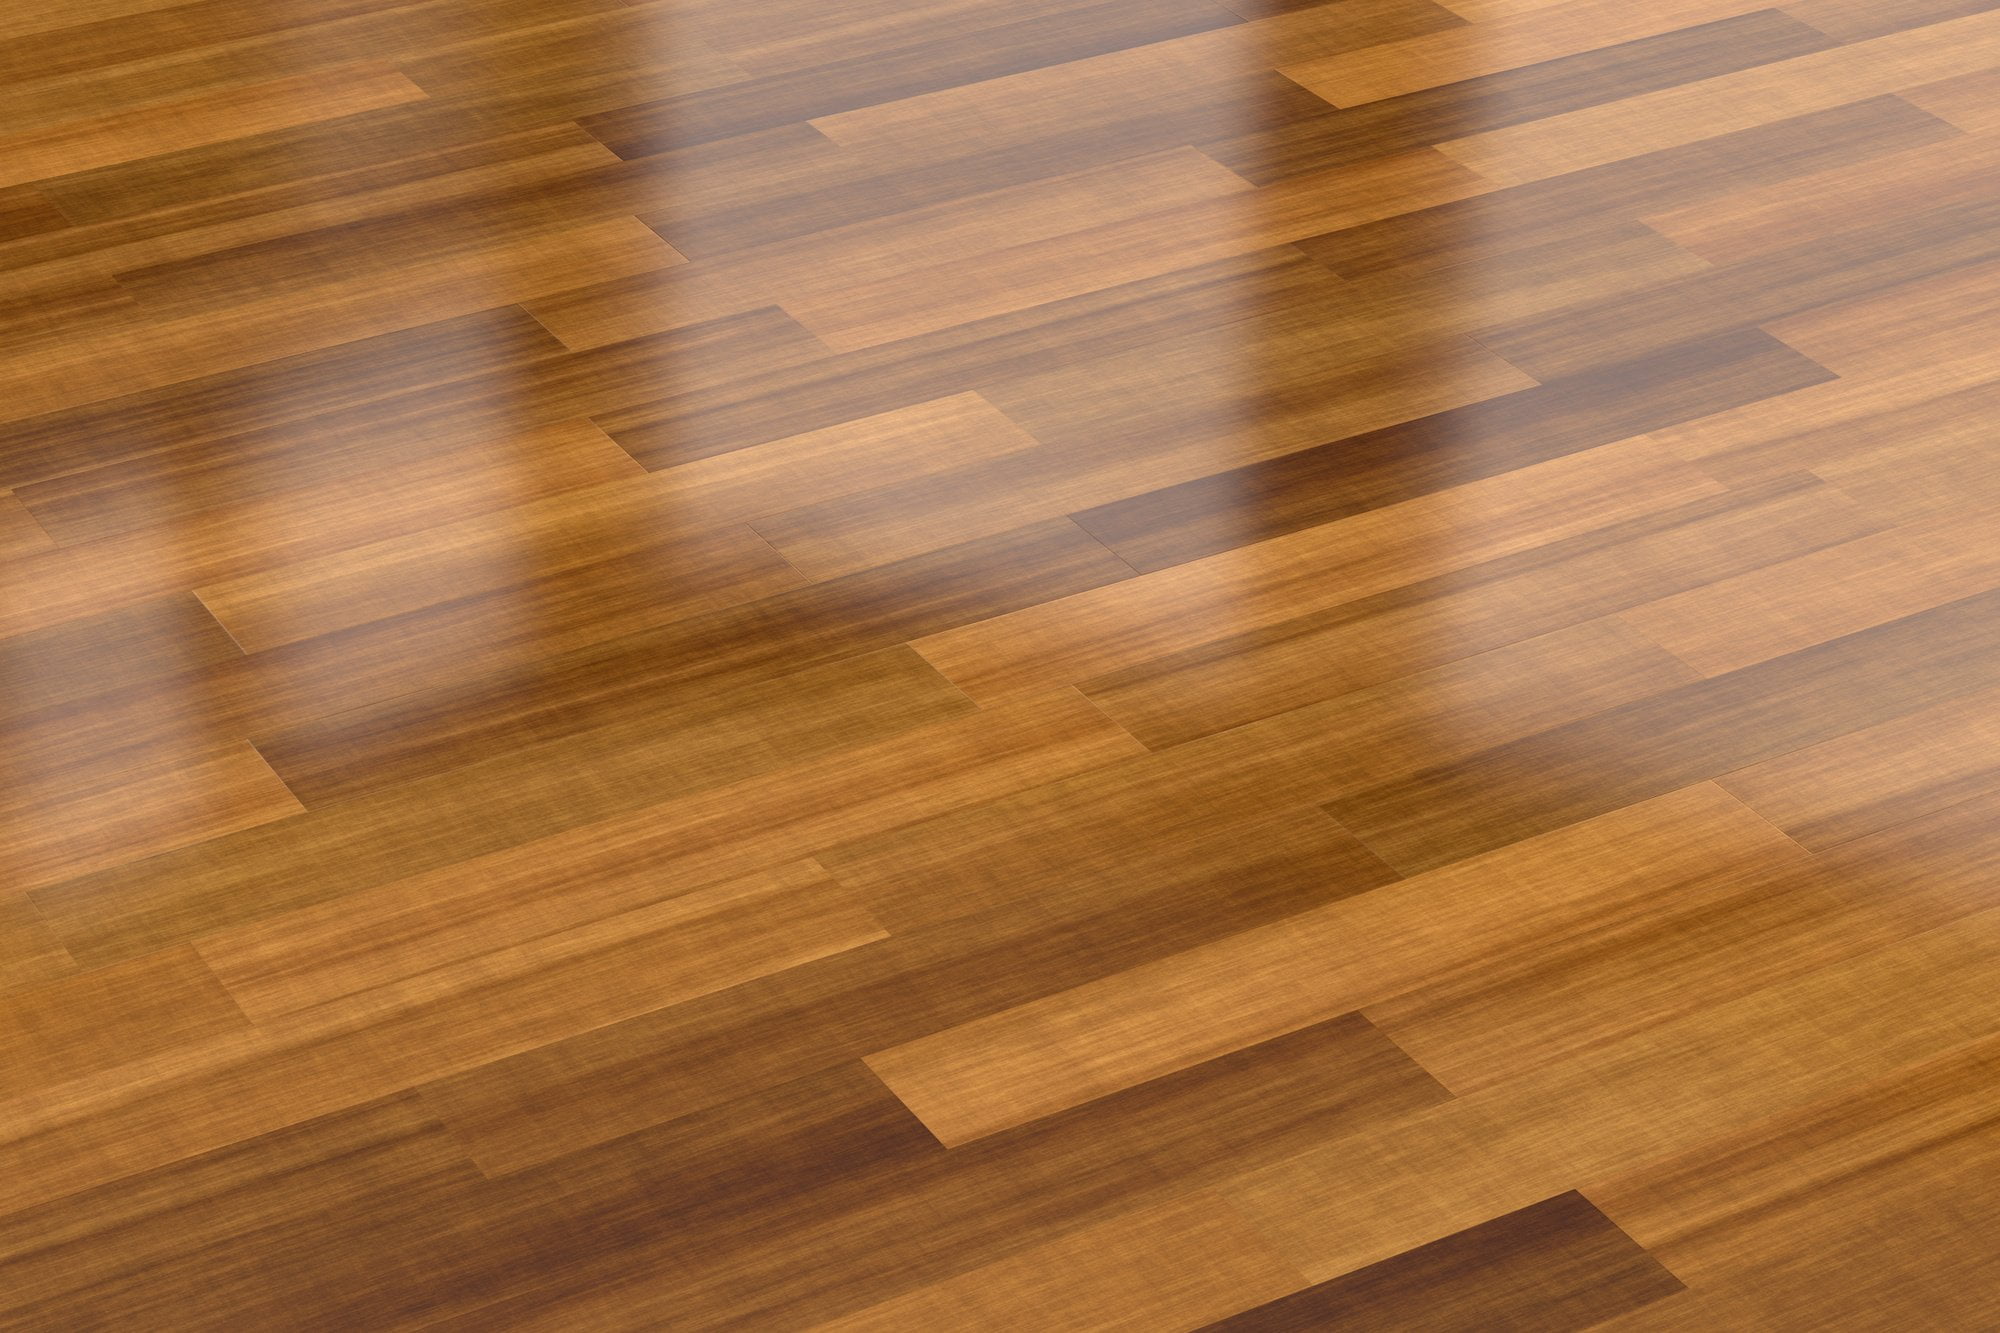 Deciding on flooring? Dive into the pre-finished hardwood flooring option and find out if it's the right choice for your home here.